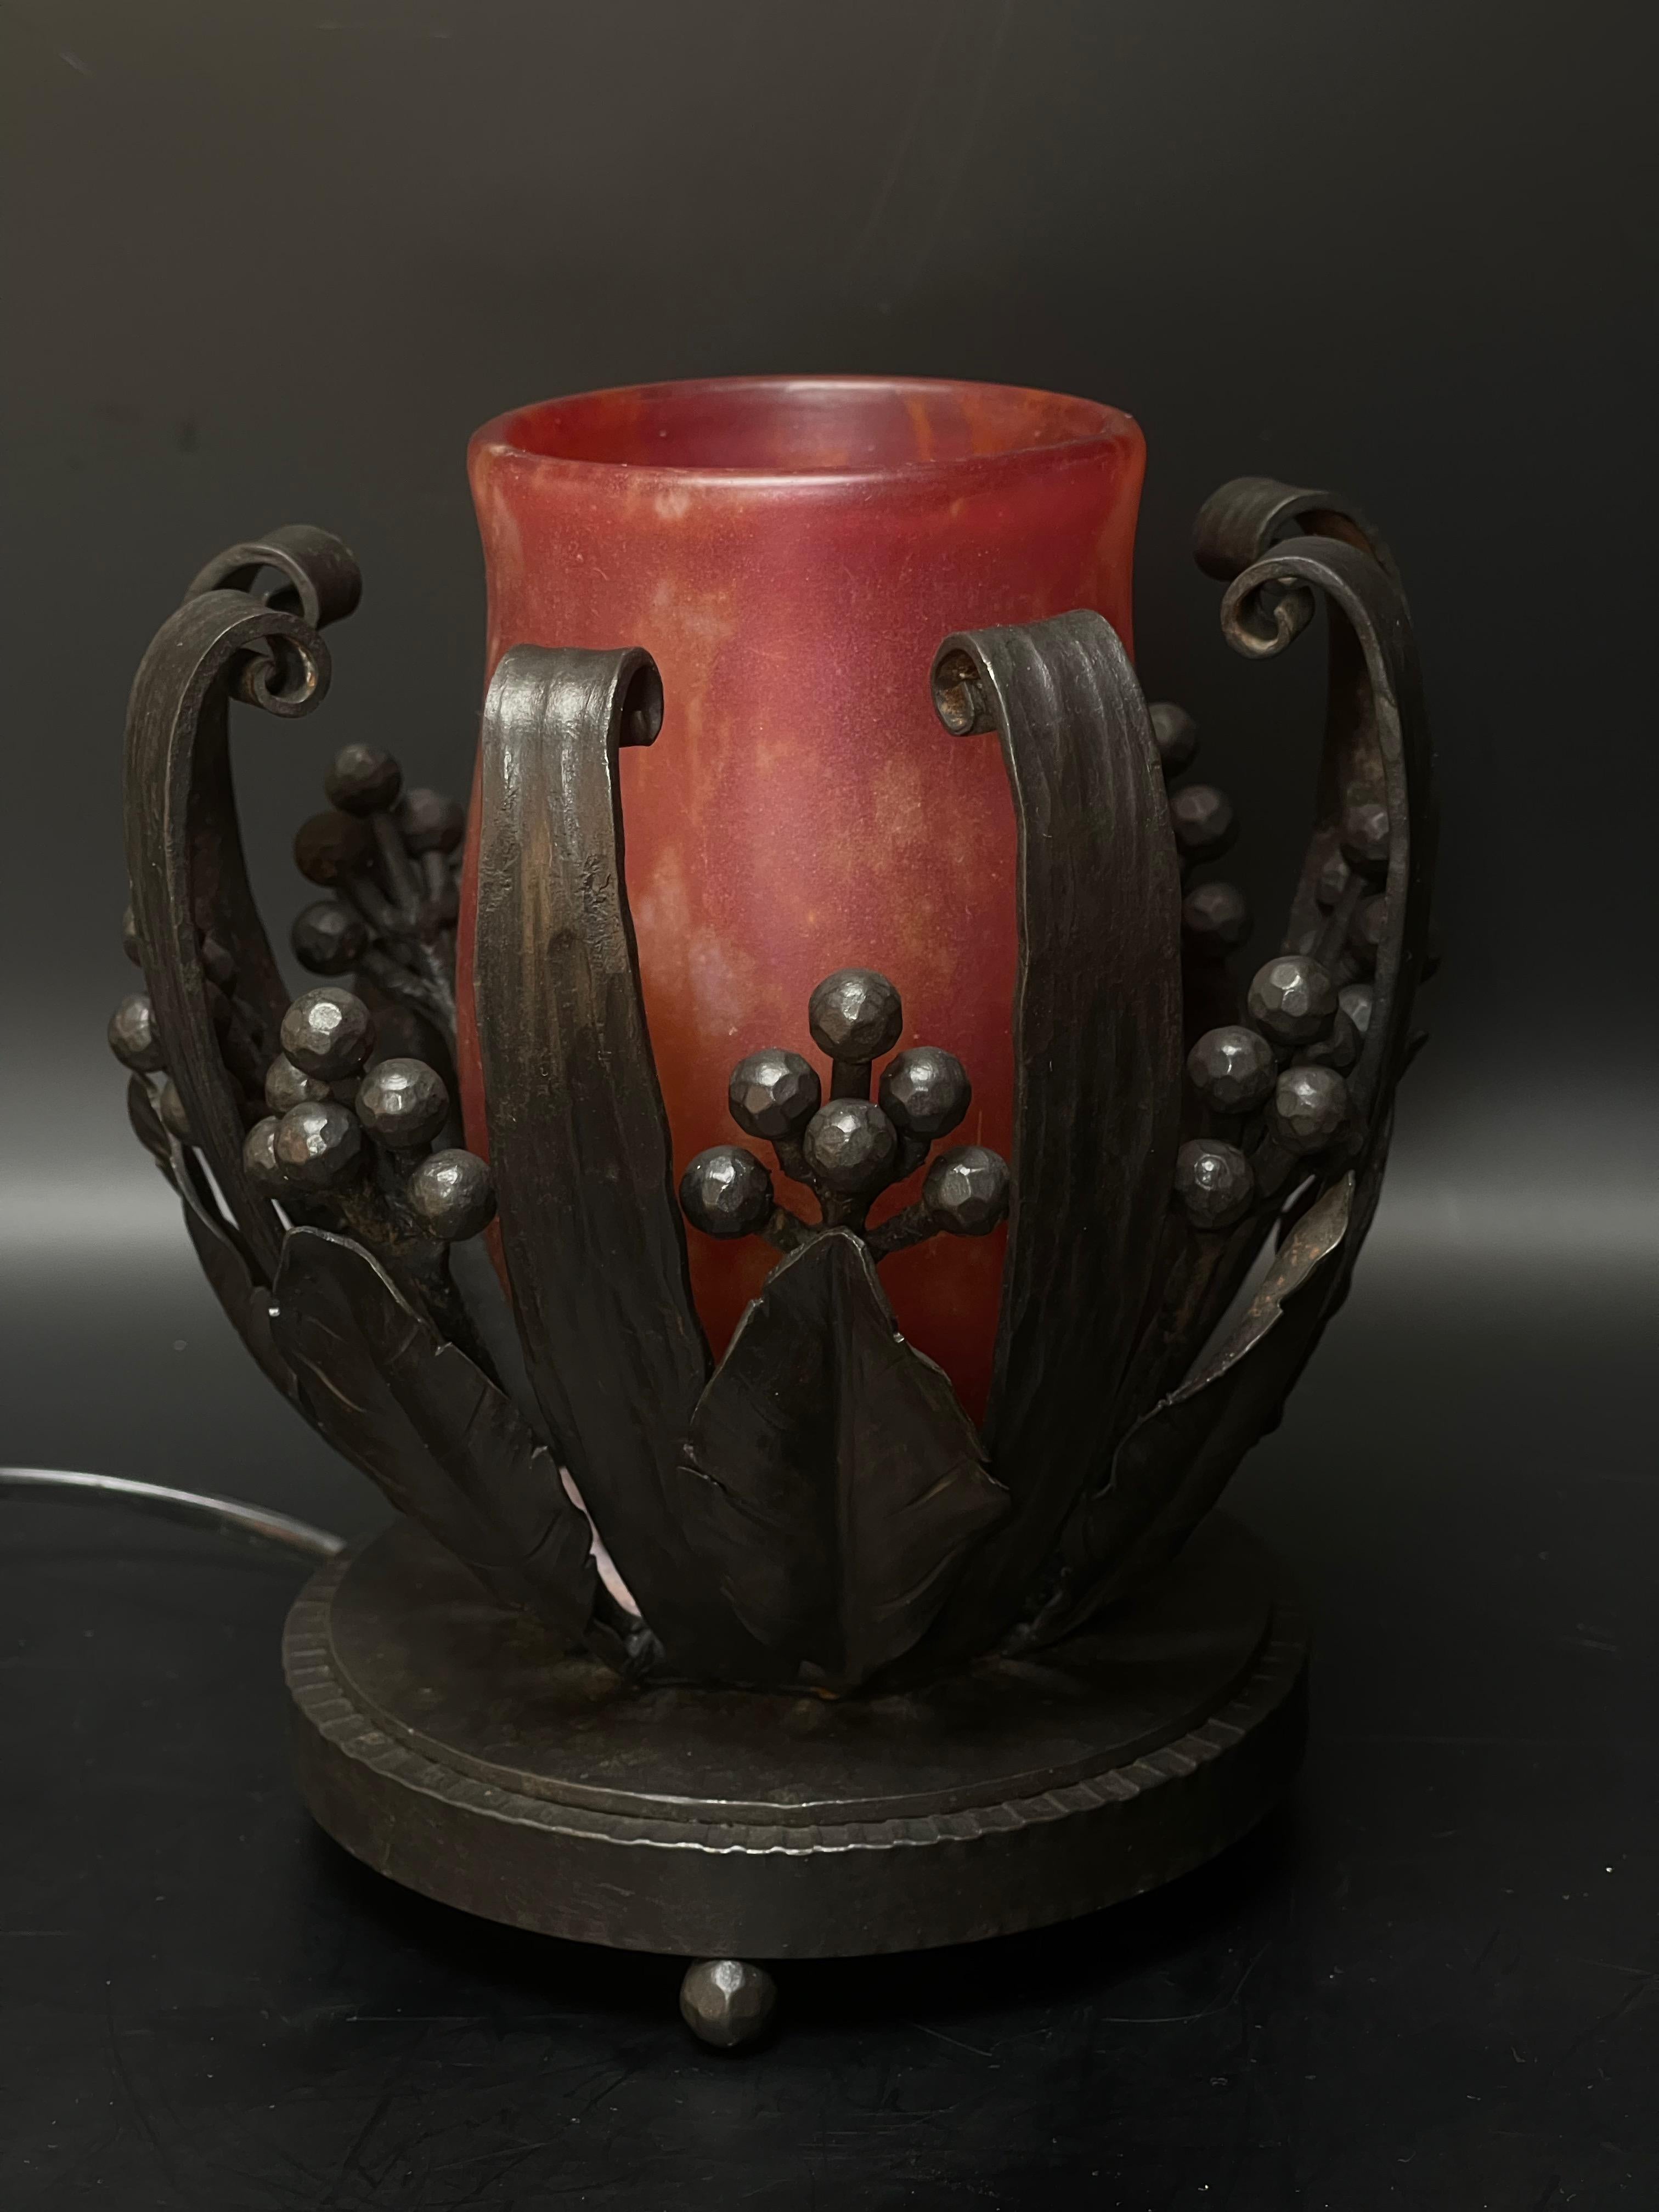 Art Deco night light around 1925 in wrought iron with floral decoration Stamped E. Brandt on the base.
Tulip in raspberry colored glass paste speckled with cream signed Daum Nancy.
Electrified and in perfect condition.
Diameter: 13 cm
Height: 18